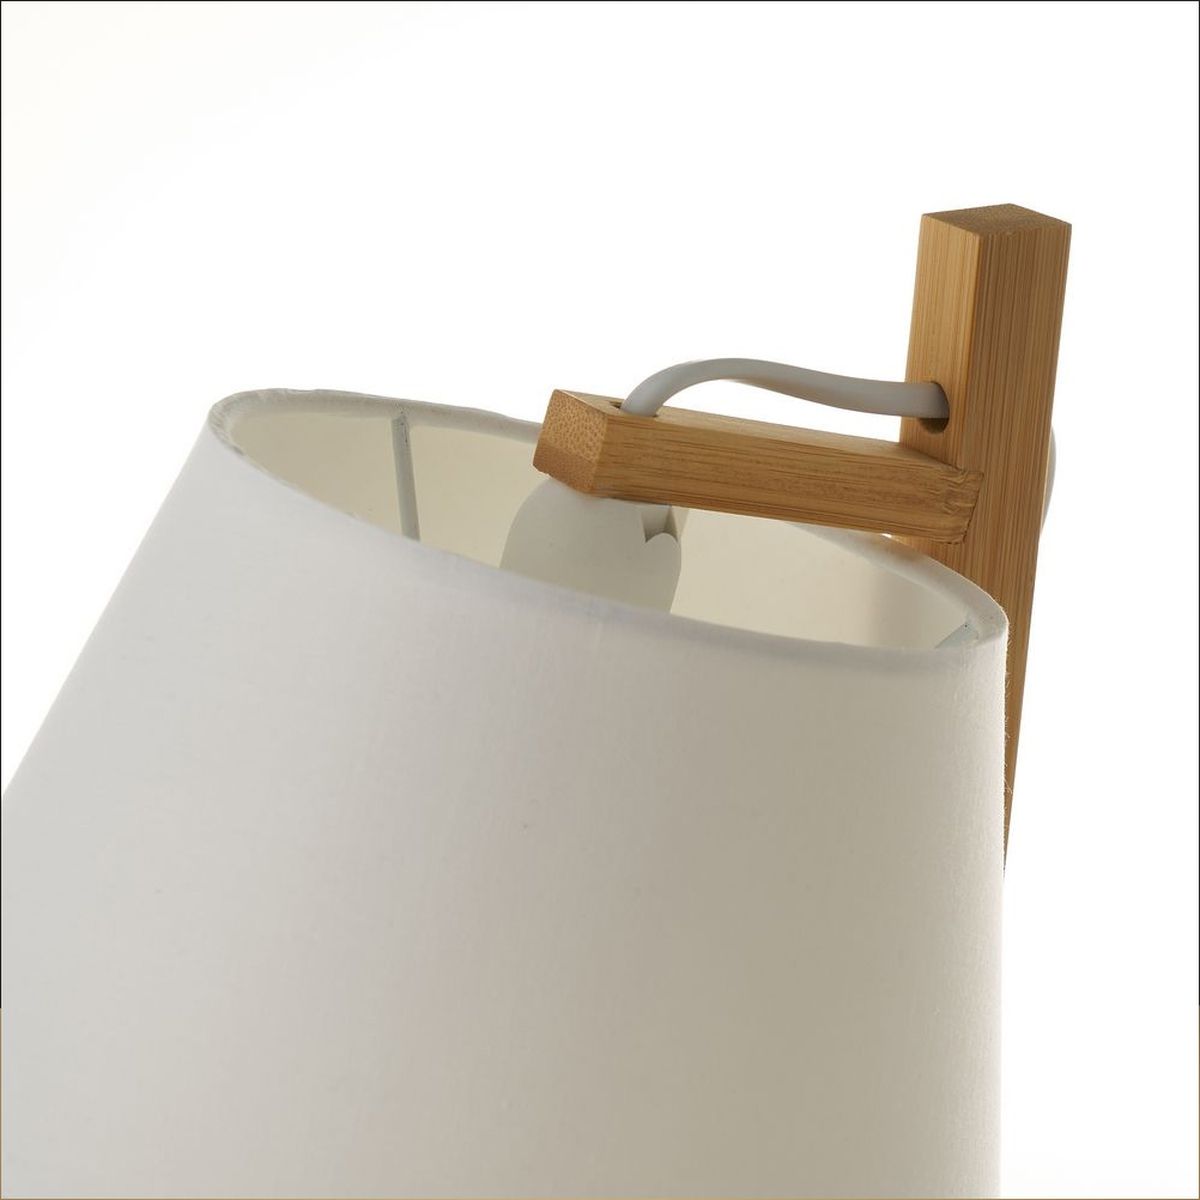 Bamboo table lamp and white shade